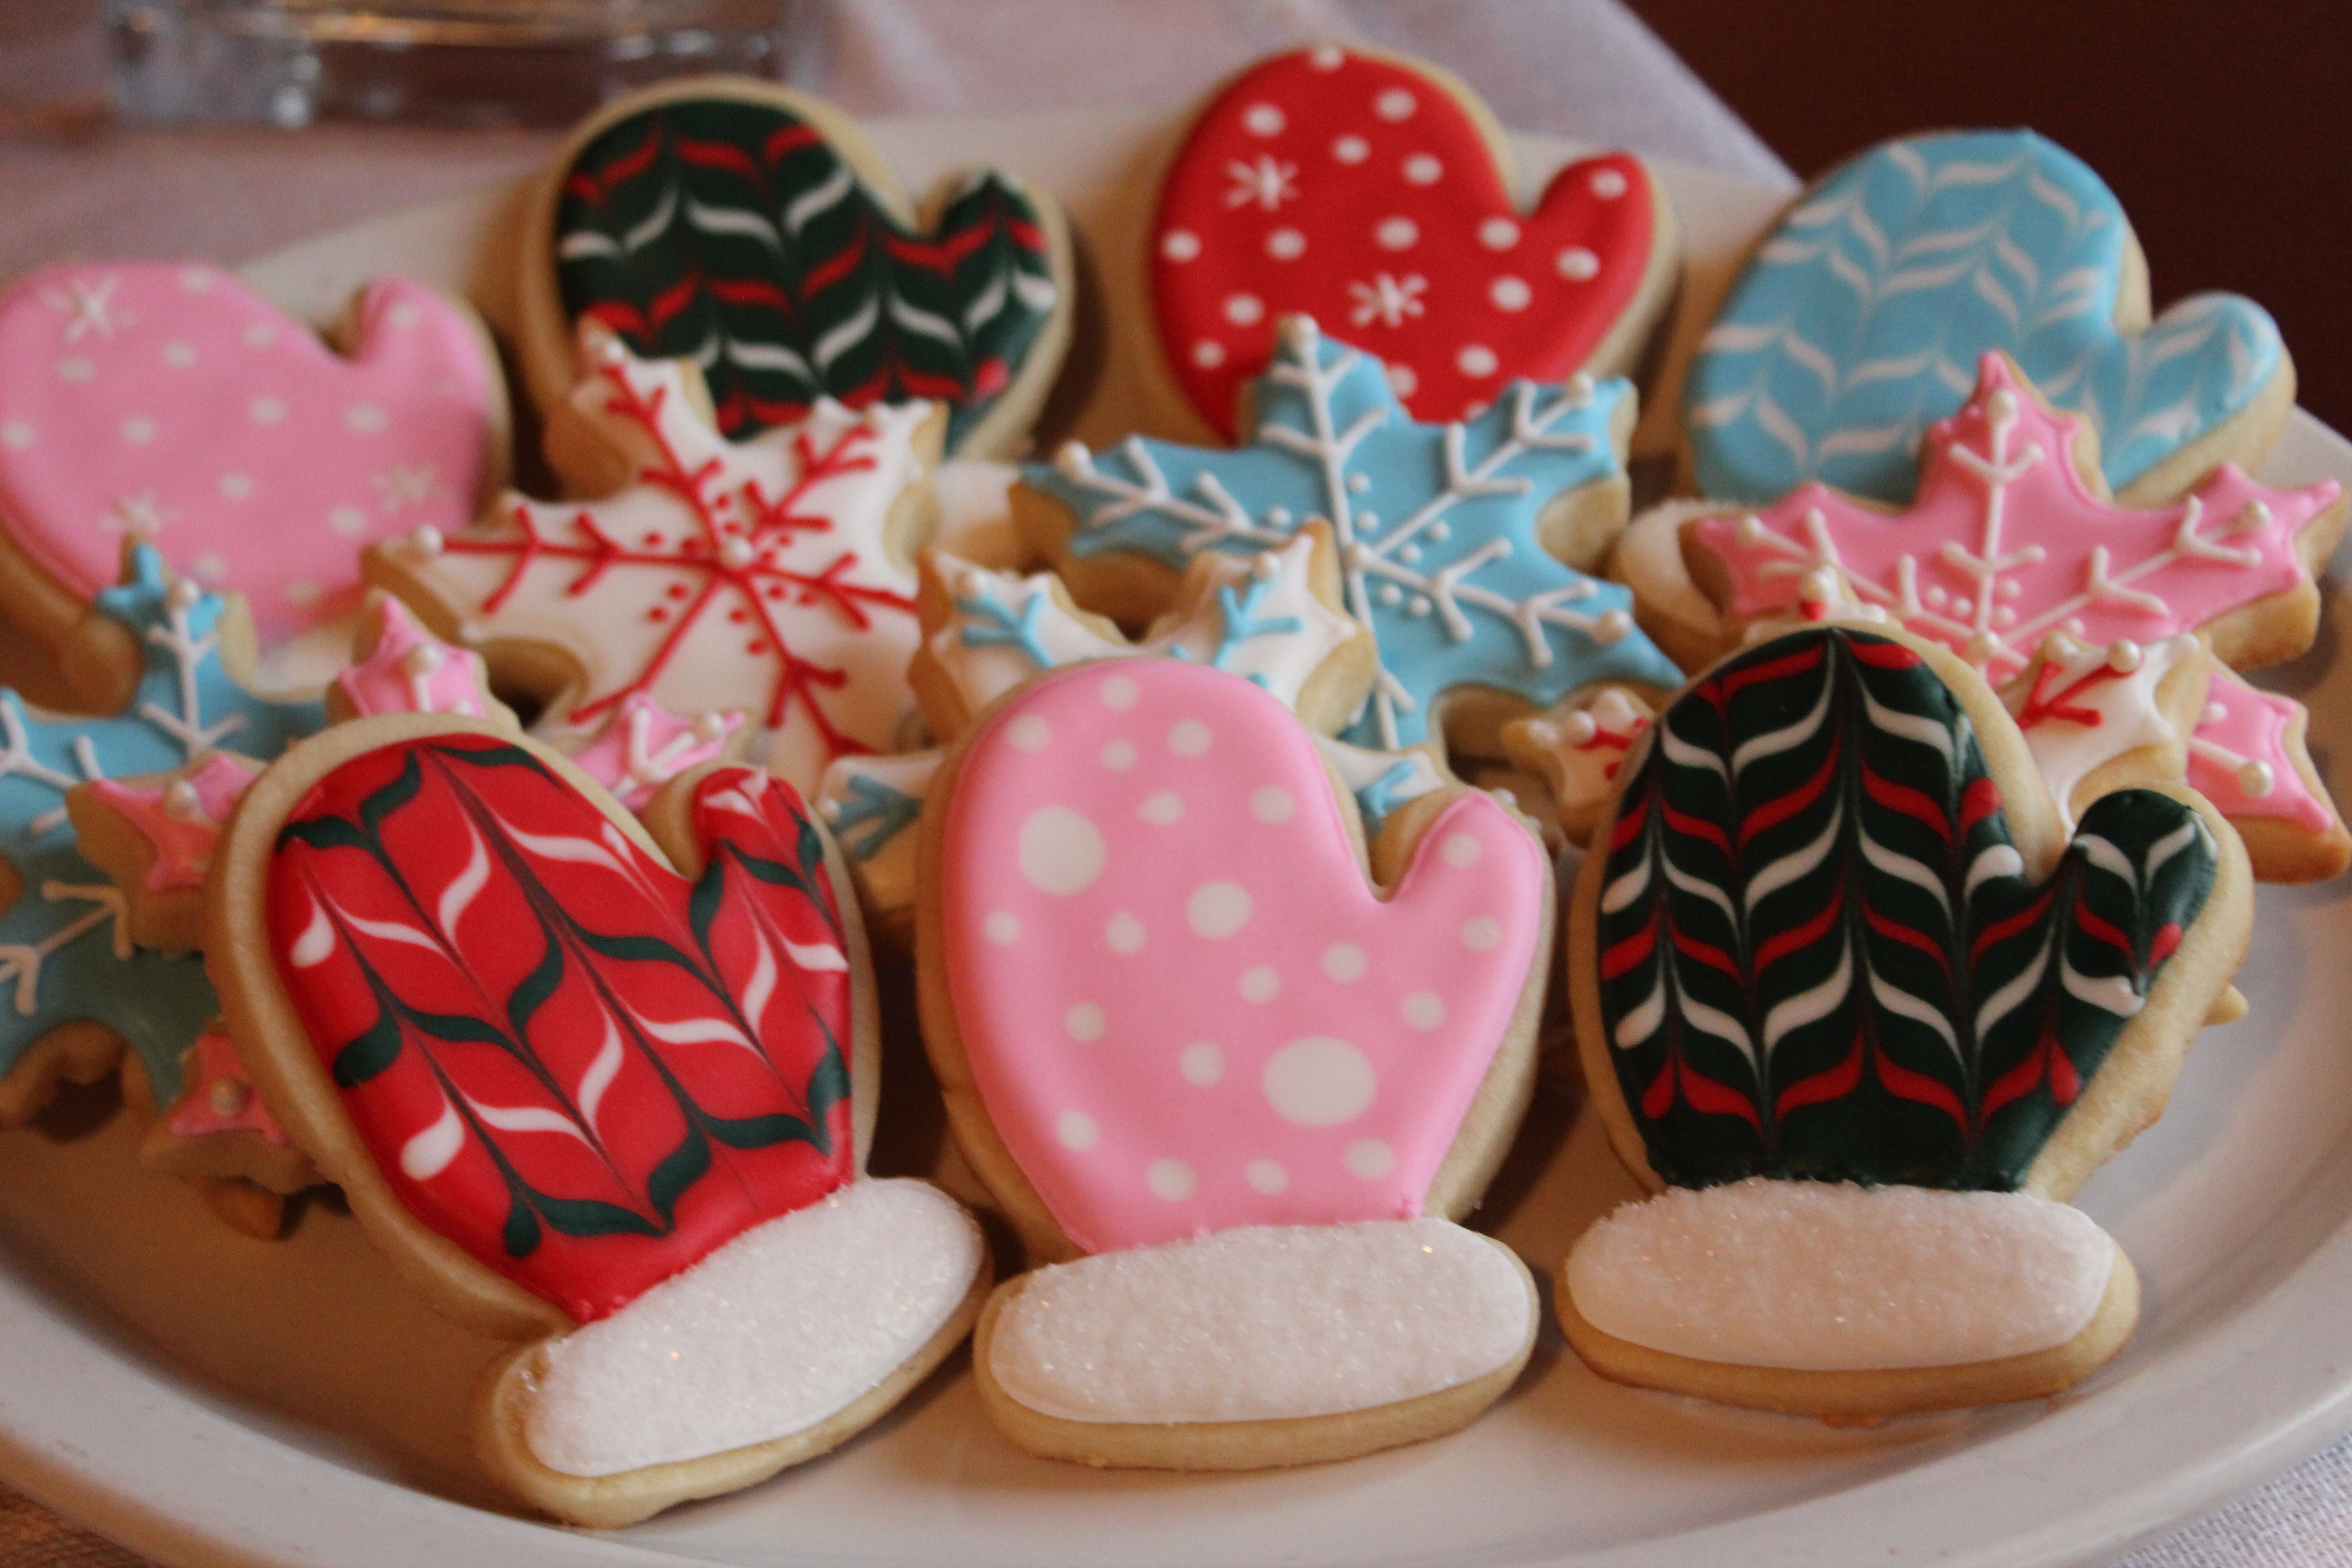 Tips [for Successful Sugar Cookie Decorating]